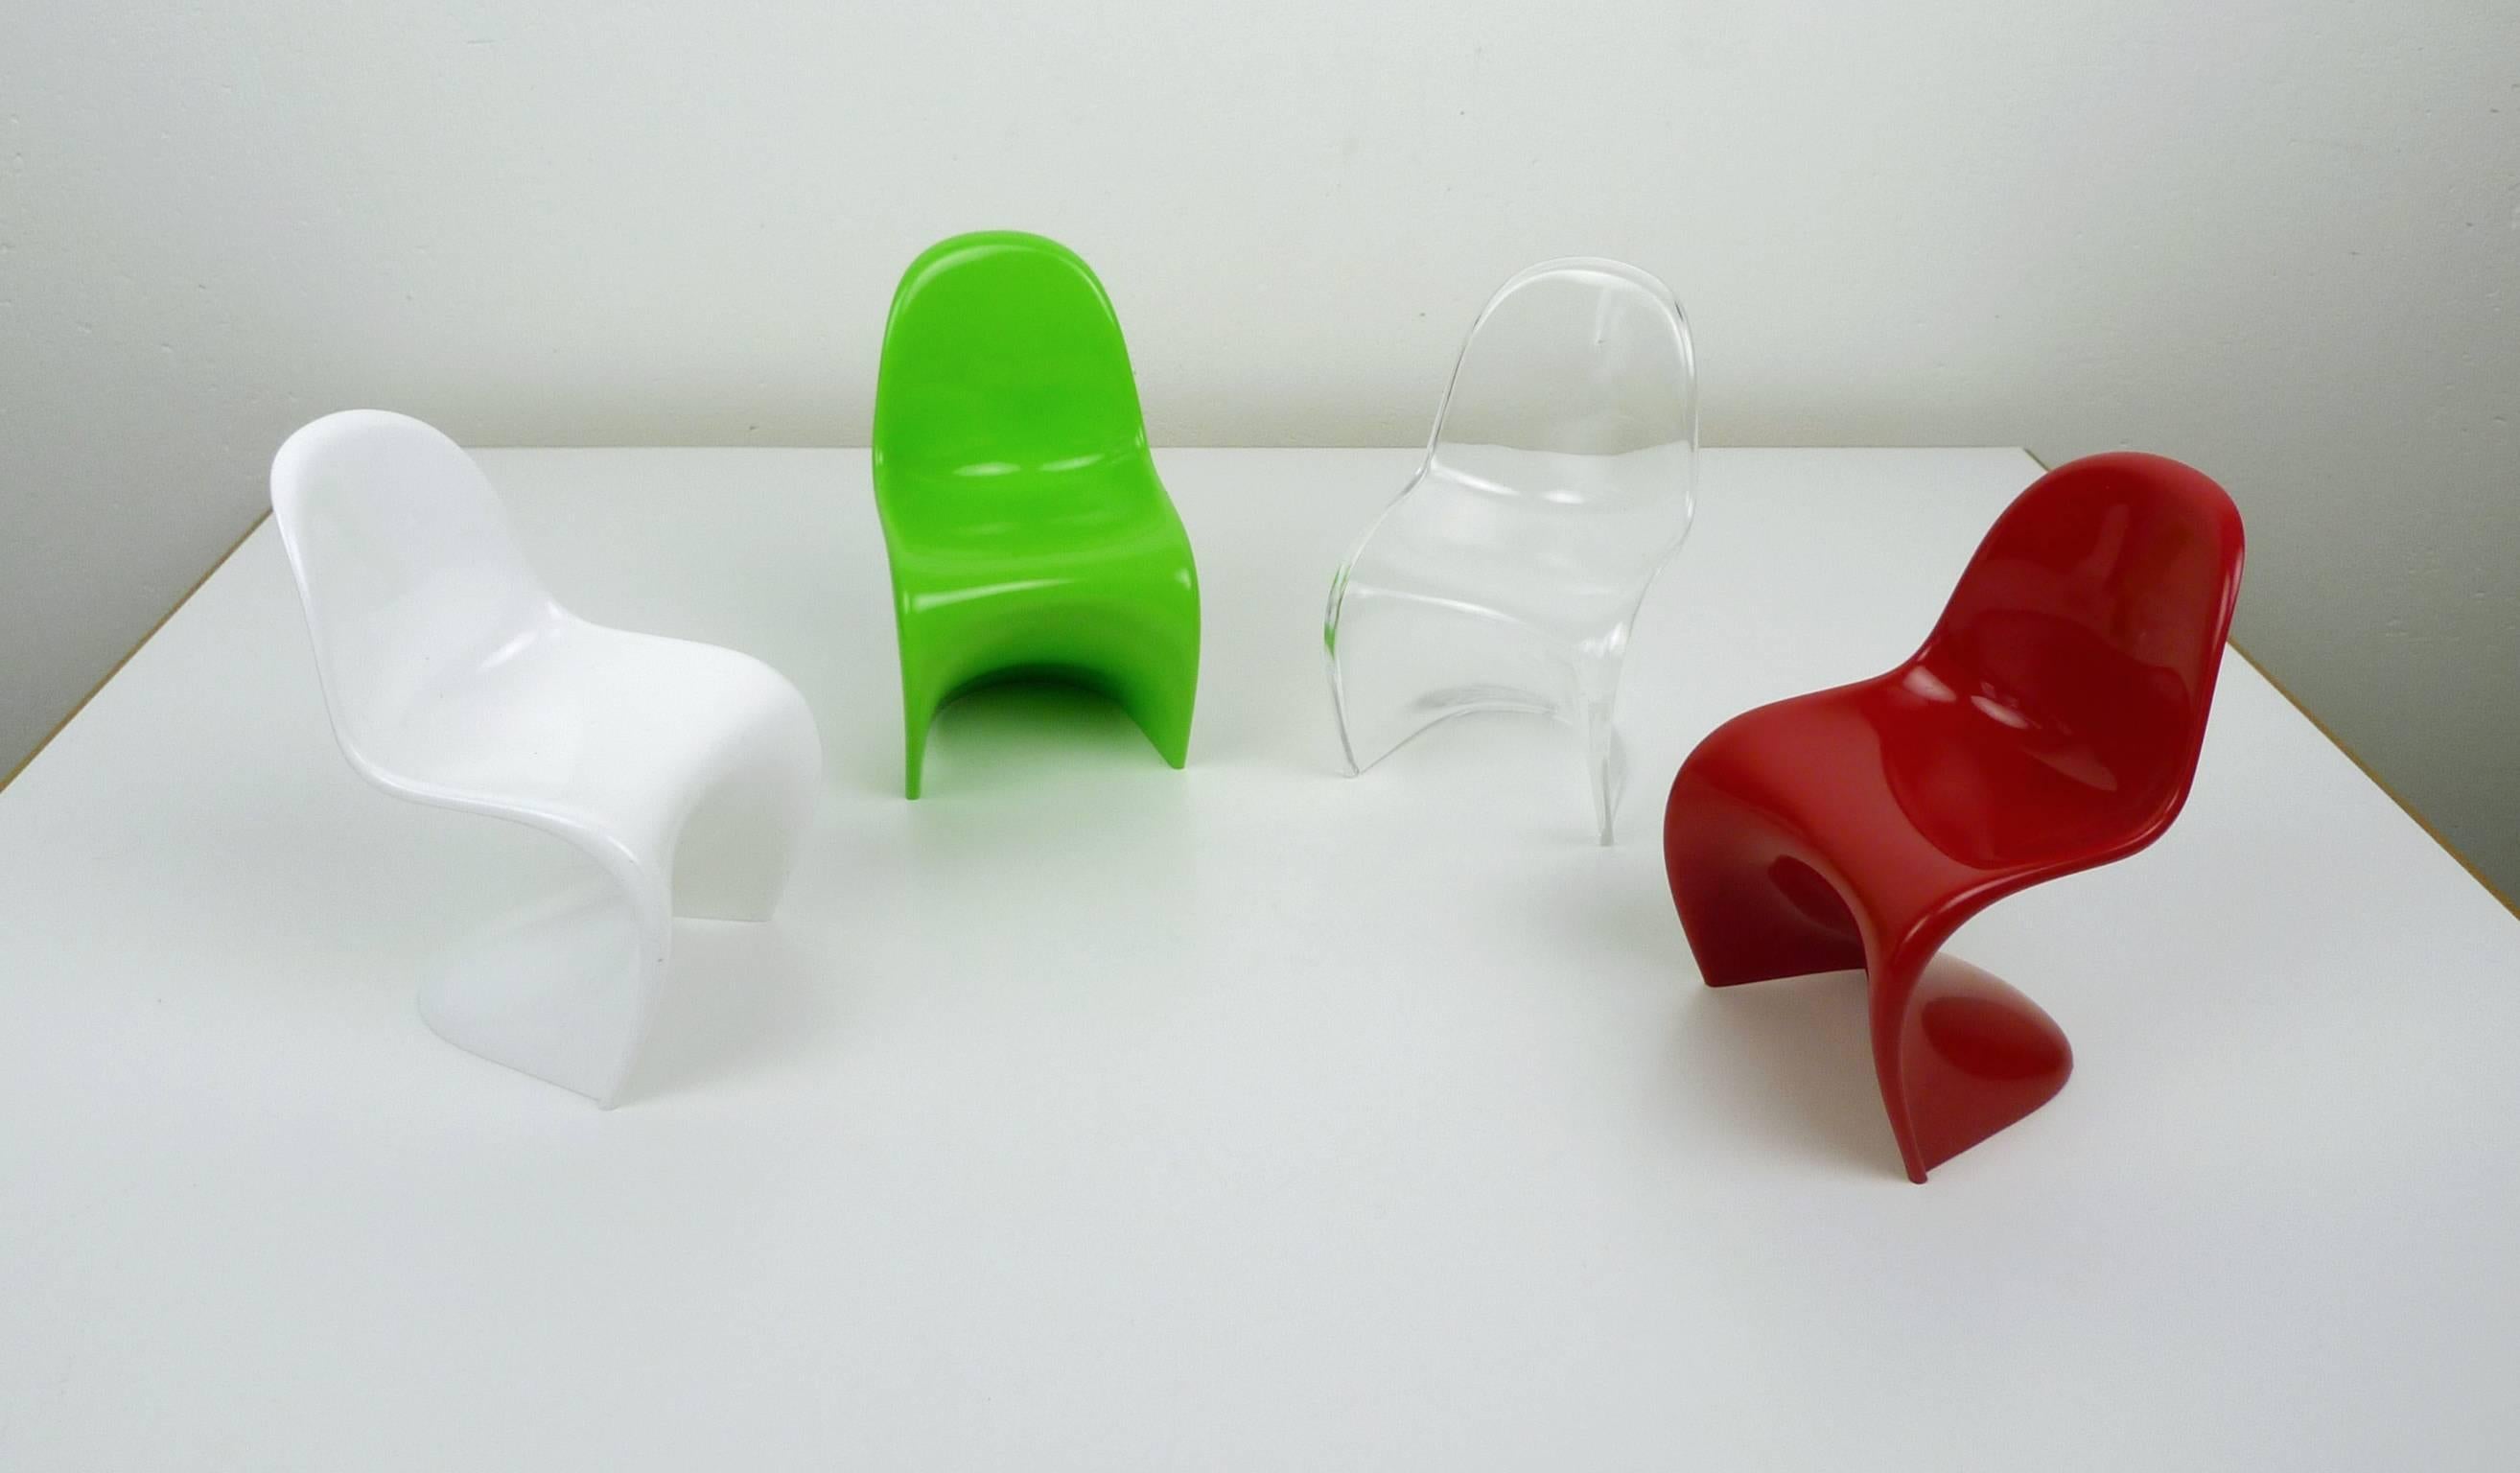 Four miniatures of the Verner Panton chair made of white, green, transparent and red plastics from the 1970s. The scale is 1:6. 
They are stackable and in a very good shape.